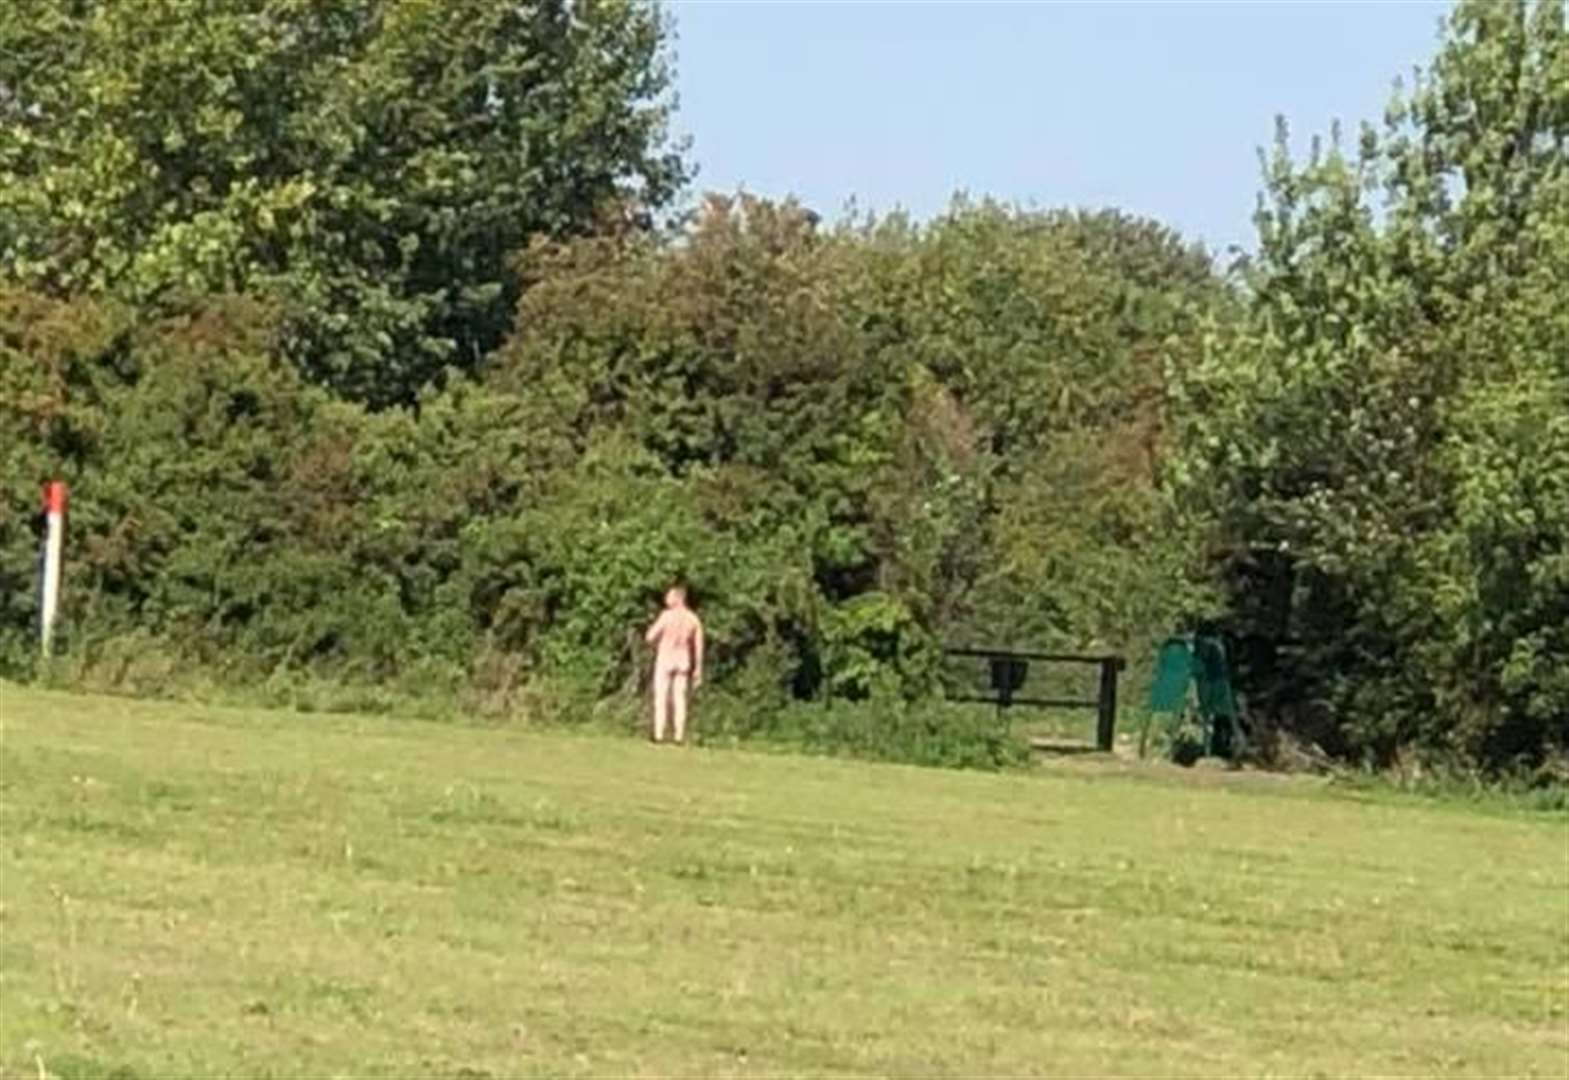 Naked man allegedly committed sex act at Riverside Country Park in  Gillingham